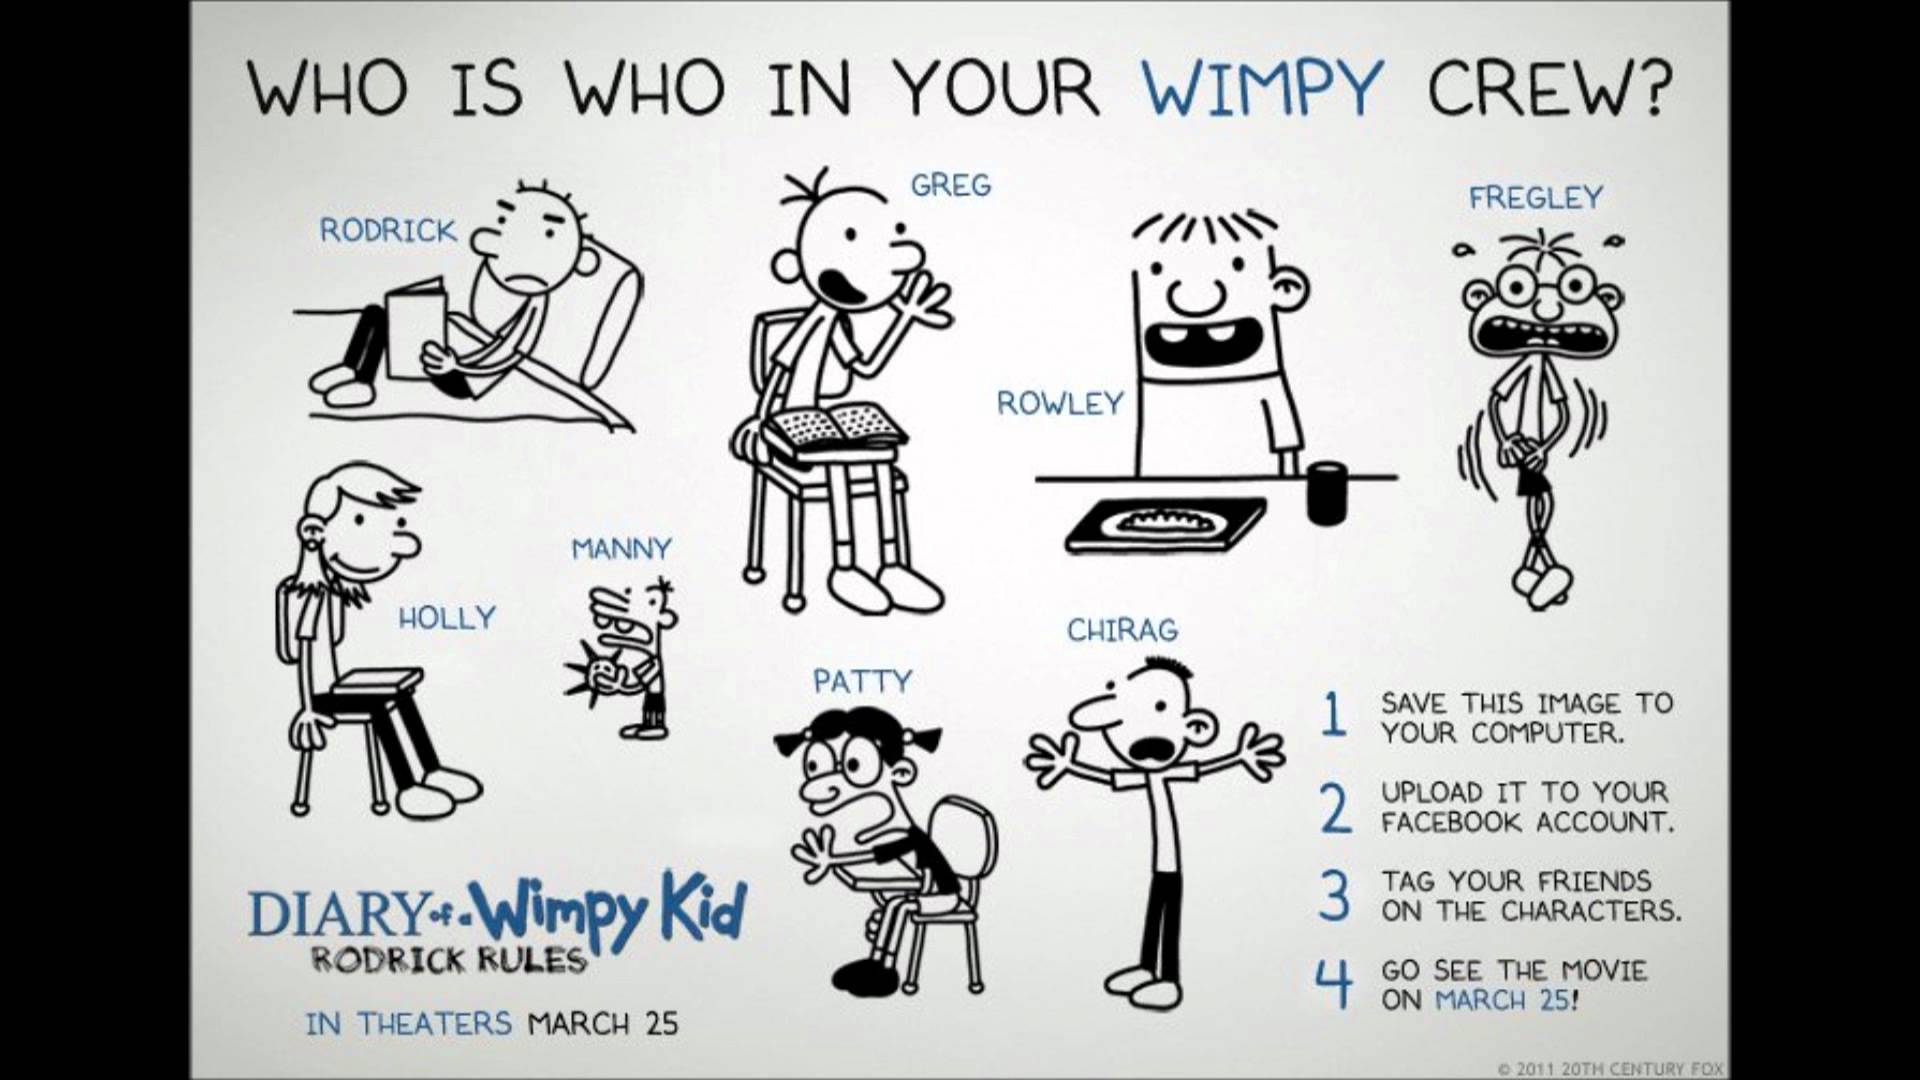 Diary Of A Wimpy Kid: Rodrick Rules HD wallpapers, Desktop wallpaper - most viewed